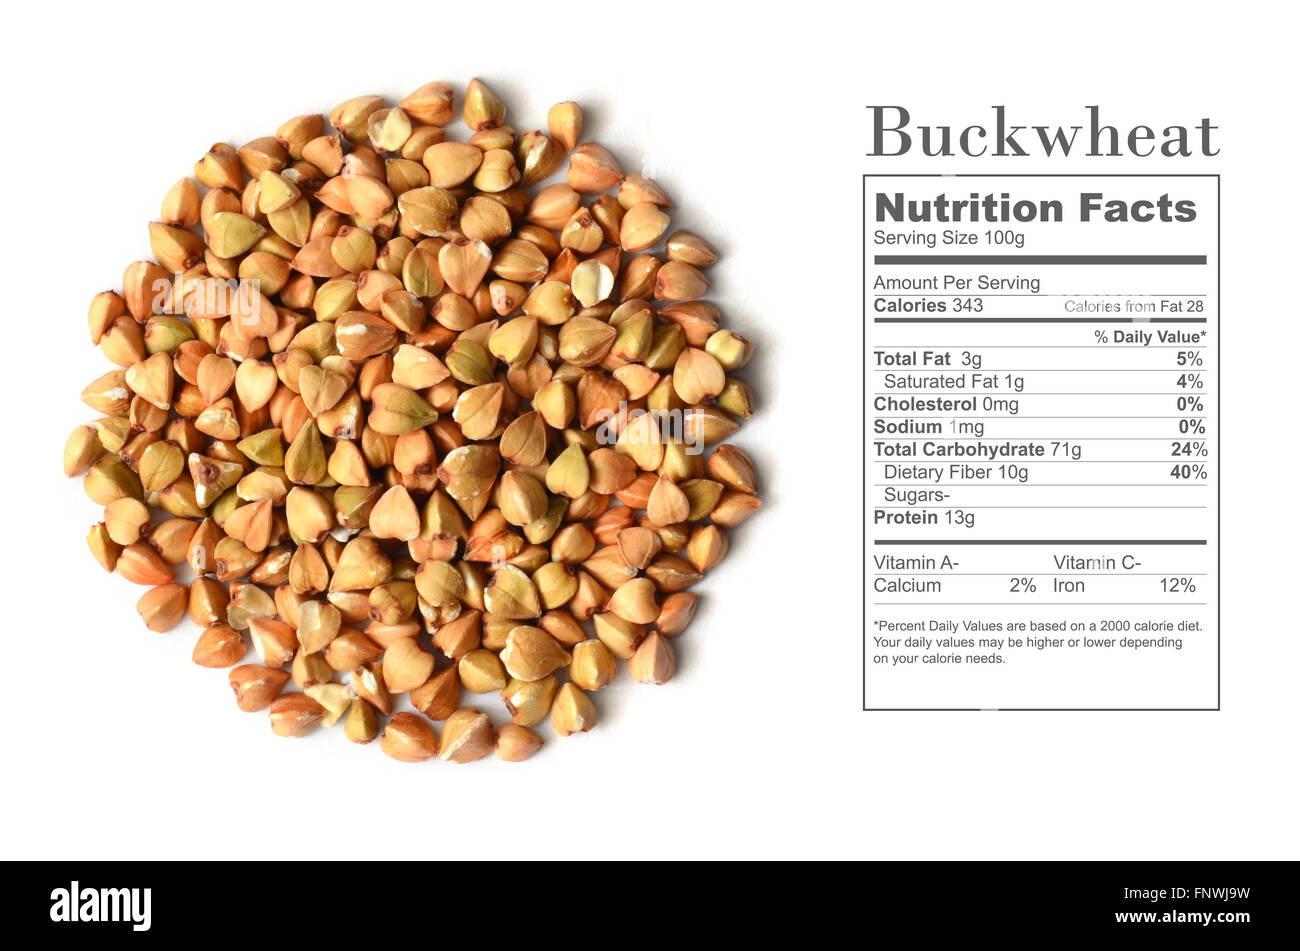 Uncooked buckwheat seeds with nutrition facts on white background Stock Photo